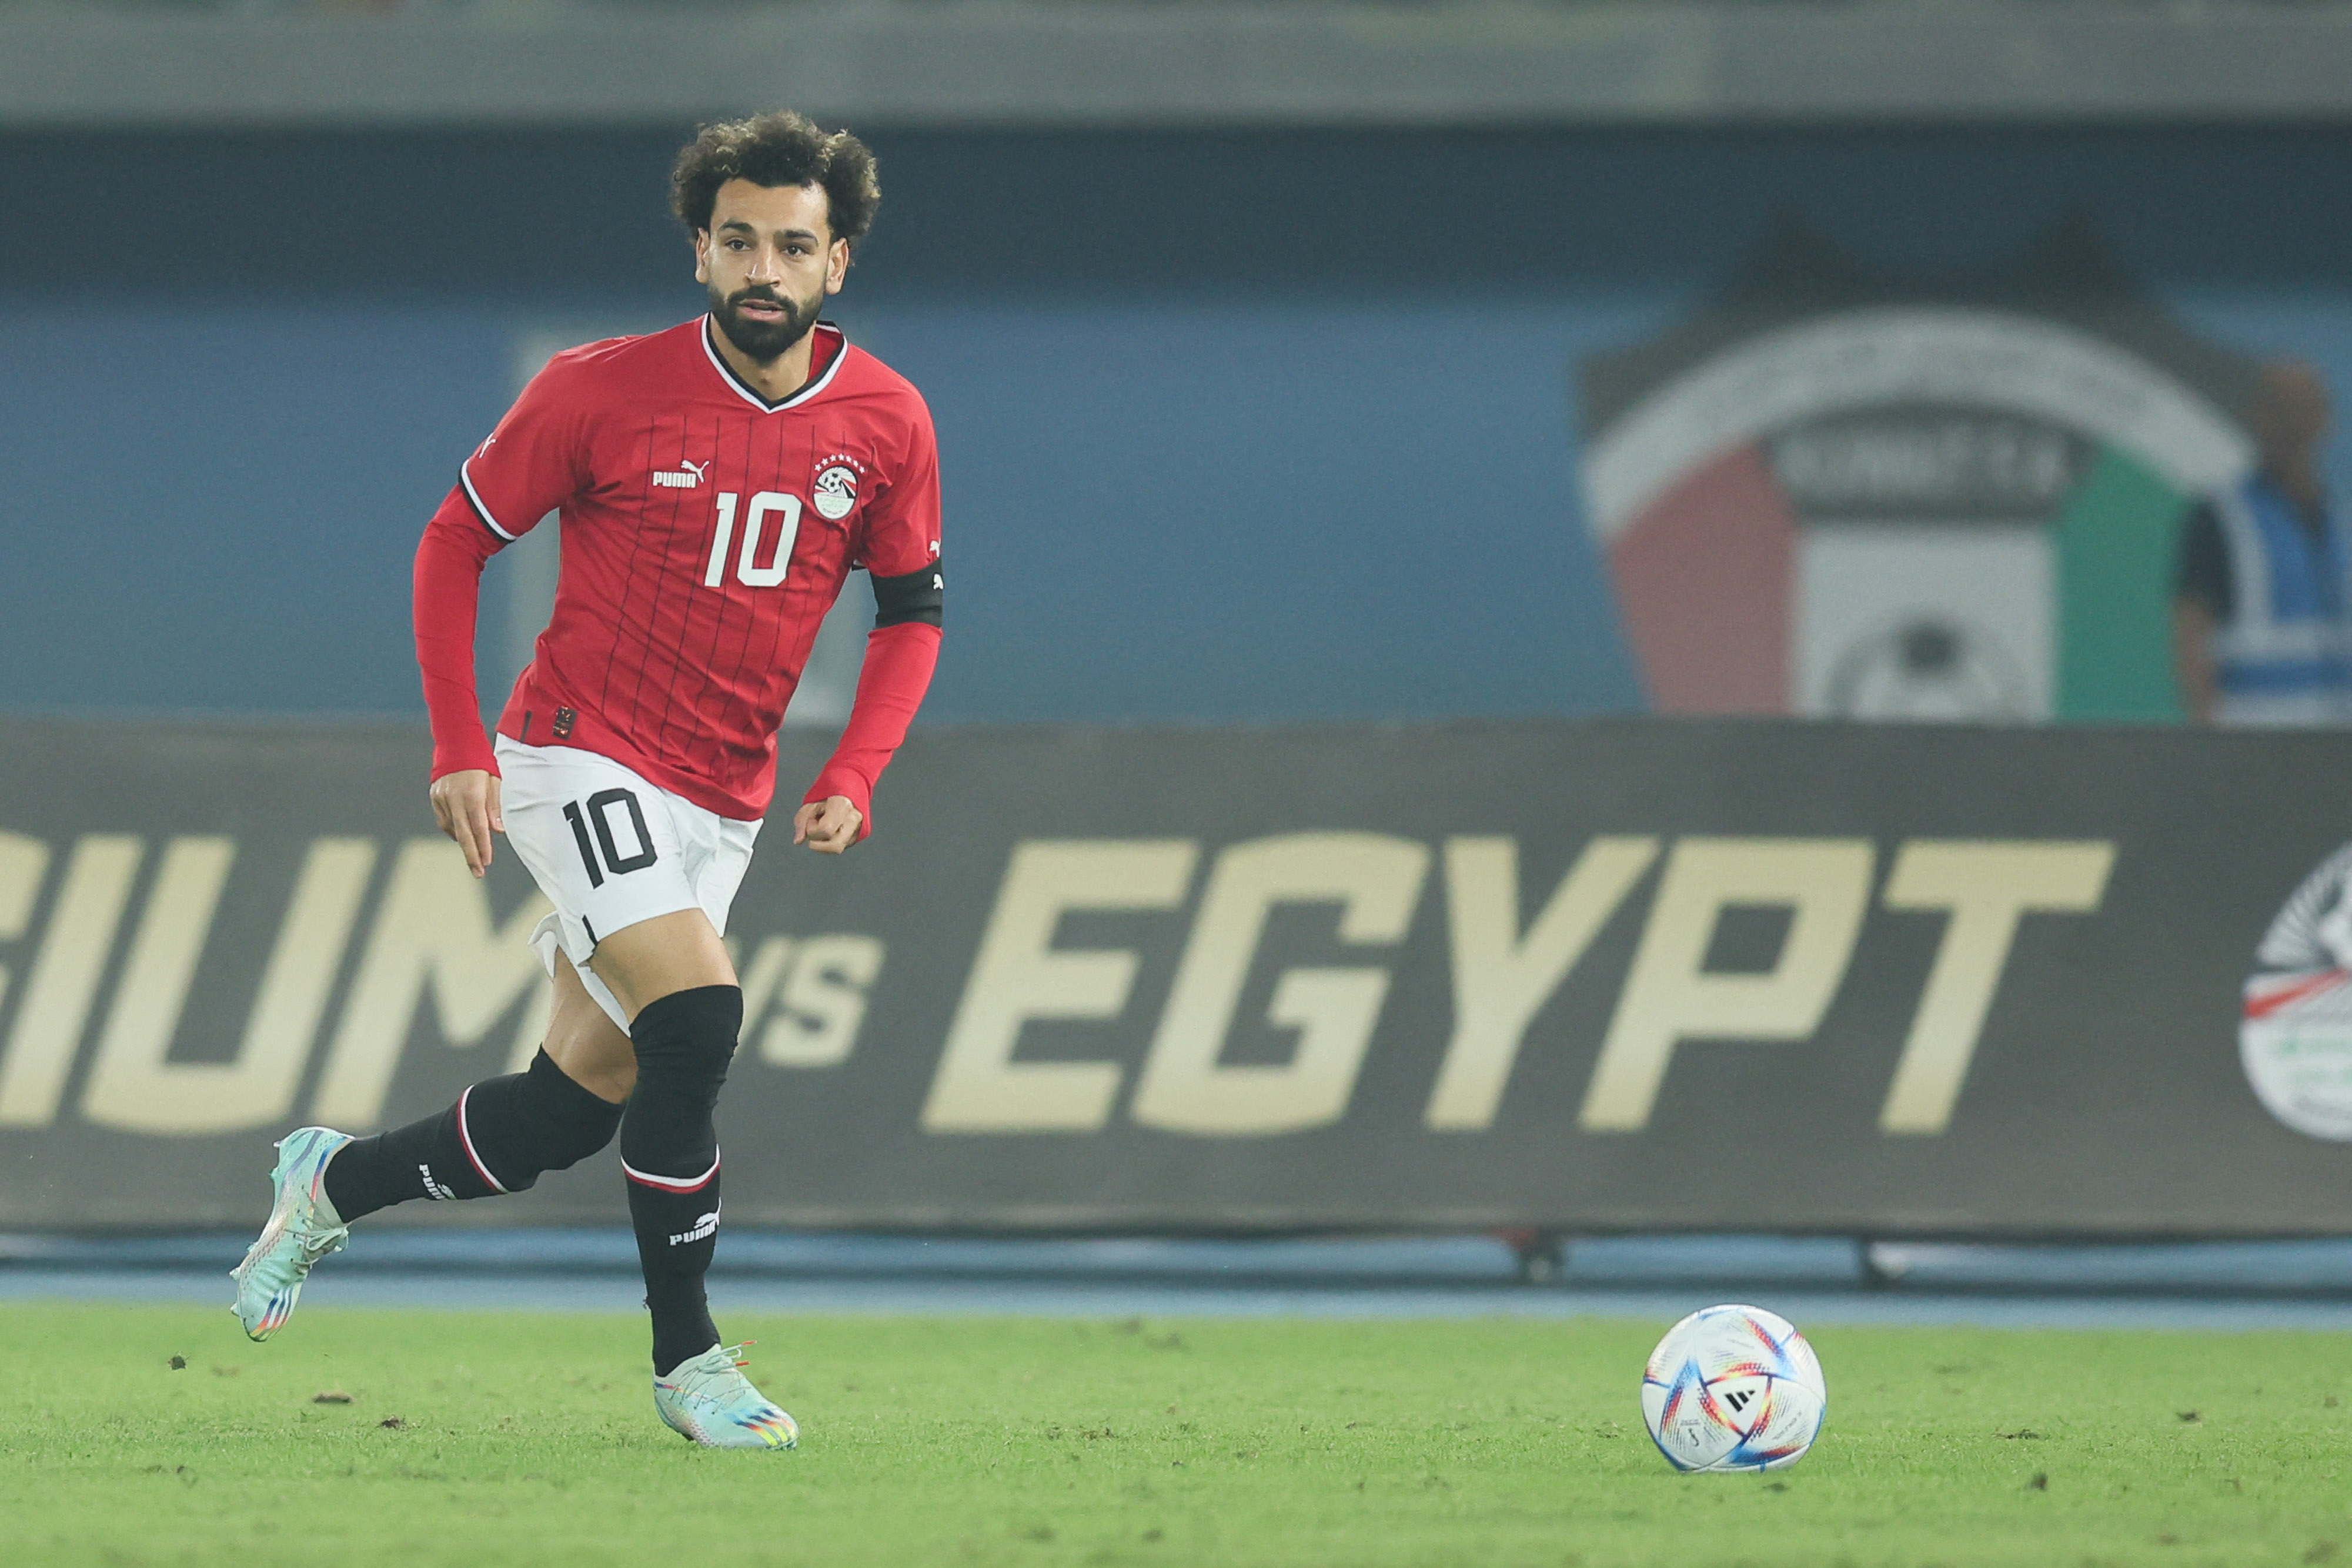 Liverpool star Mohamed Salah scored a goal and assisted another in Egypt's 4-0 win over Malawi.